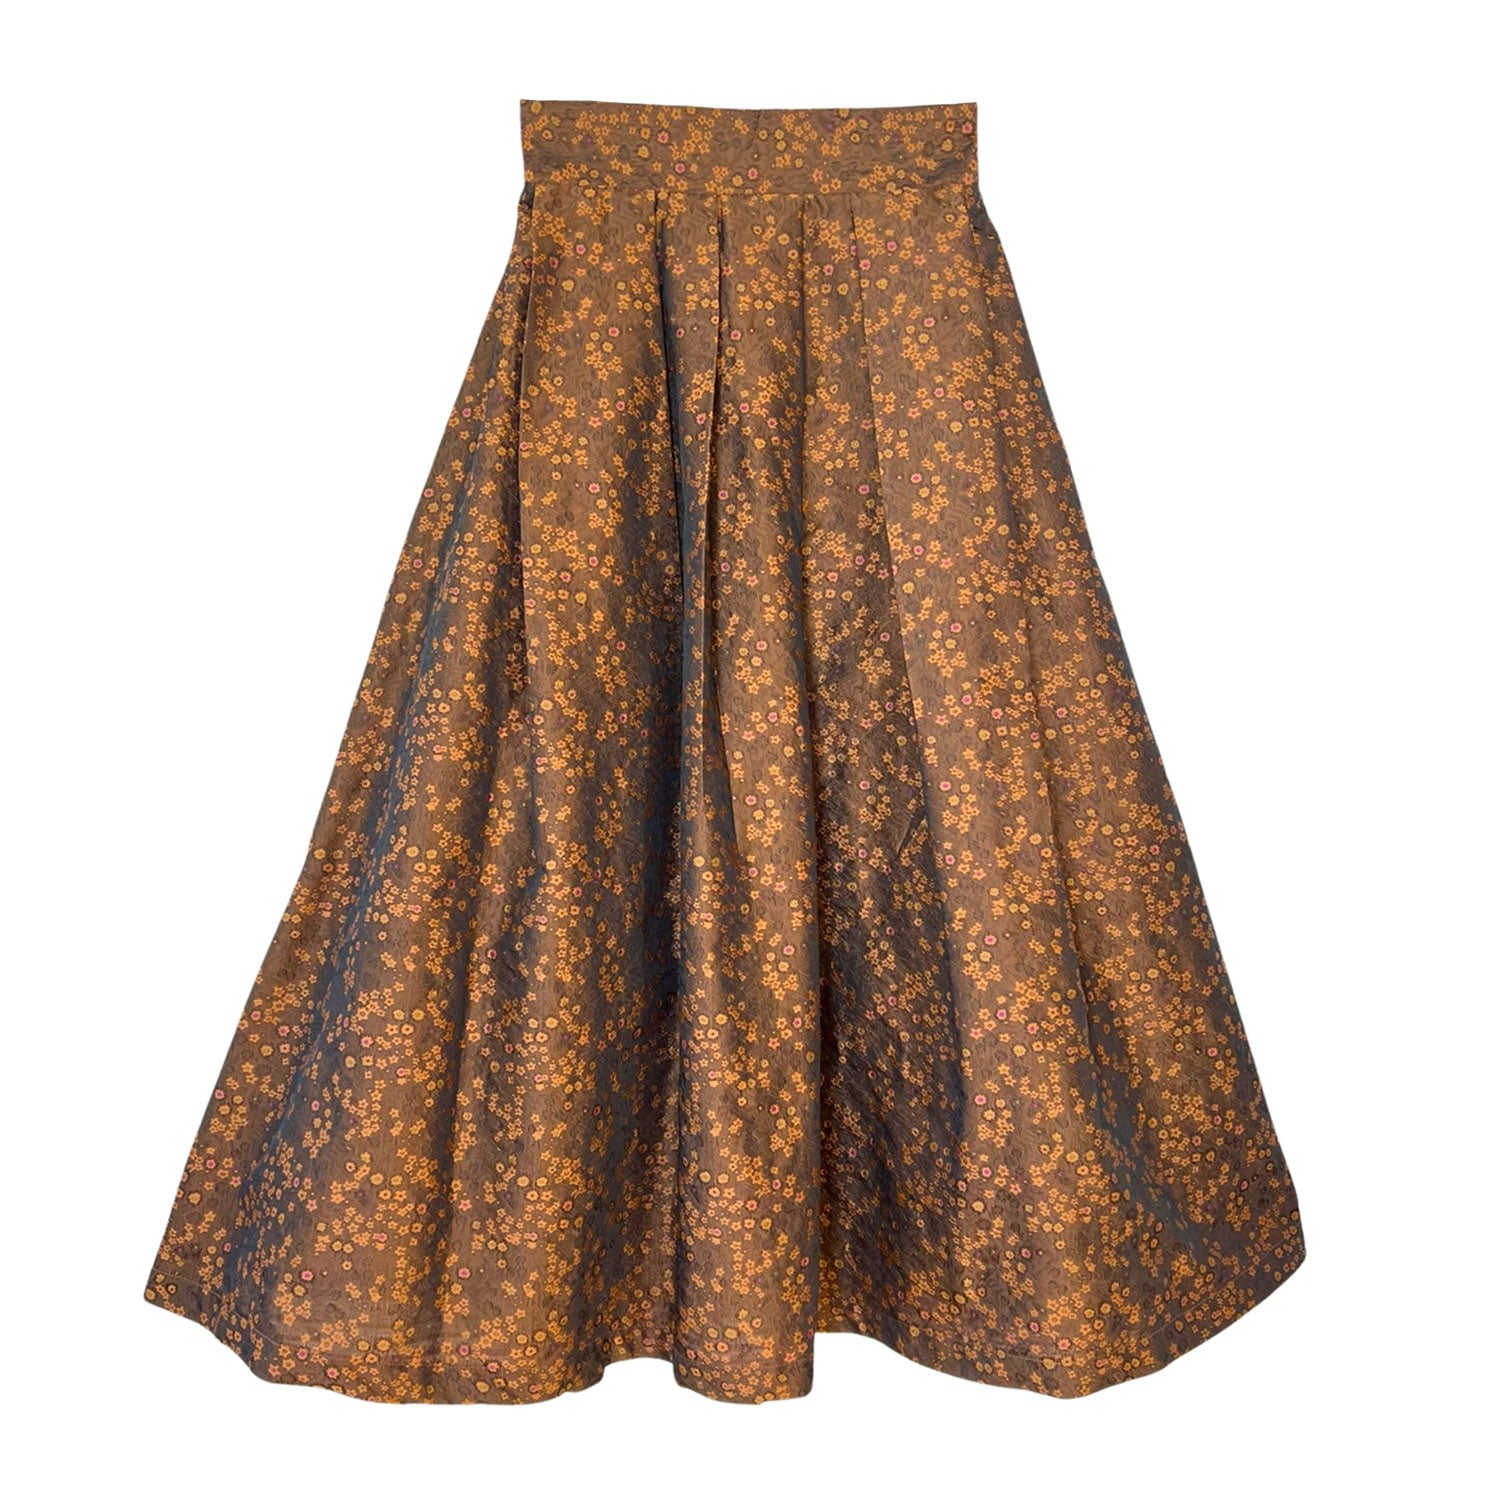 Women’s Green / Yellow / Orange Floral Brocade Midi Skirt In Caramel Brown Small L2R the Label